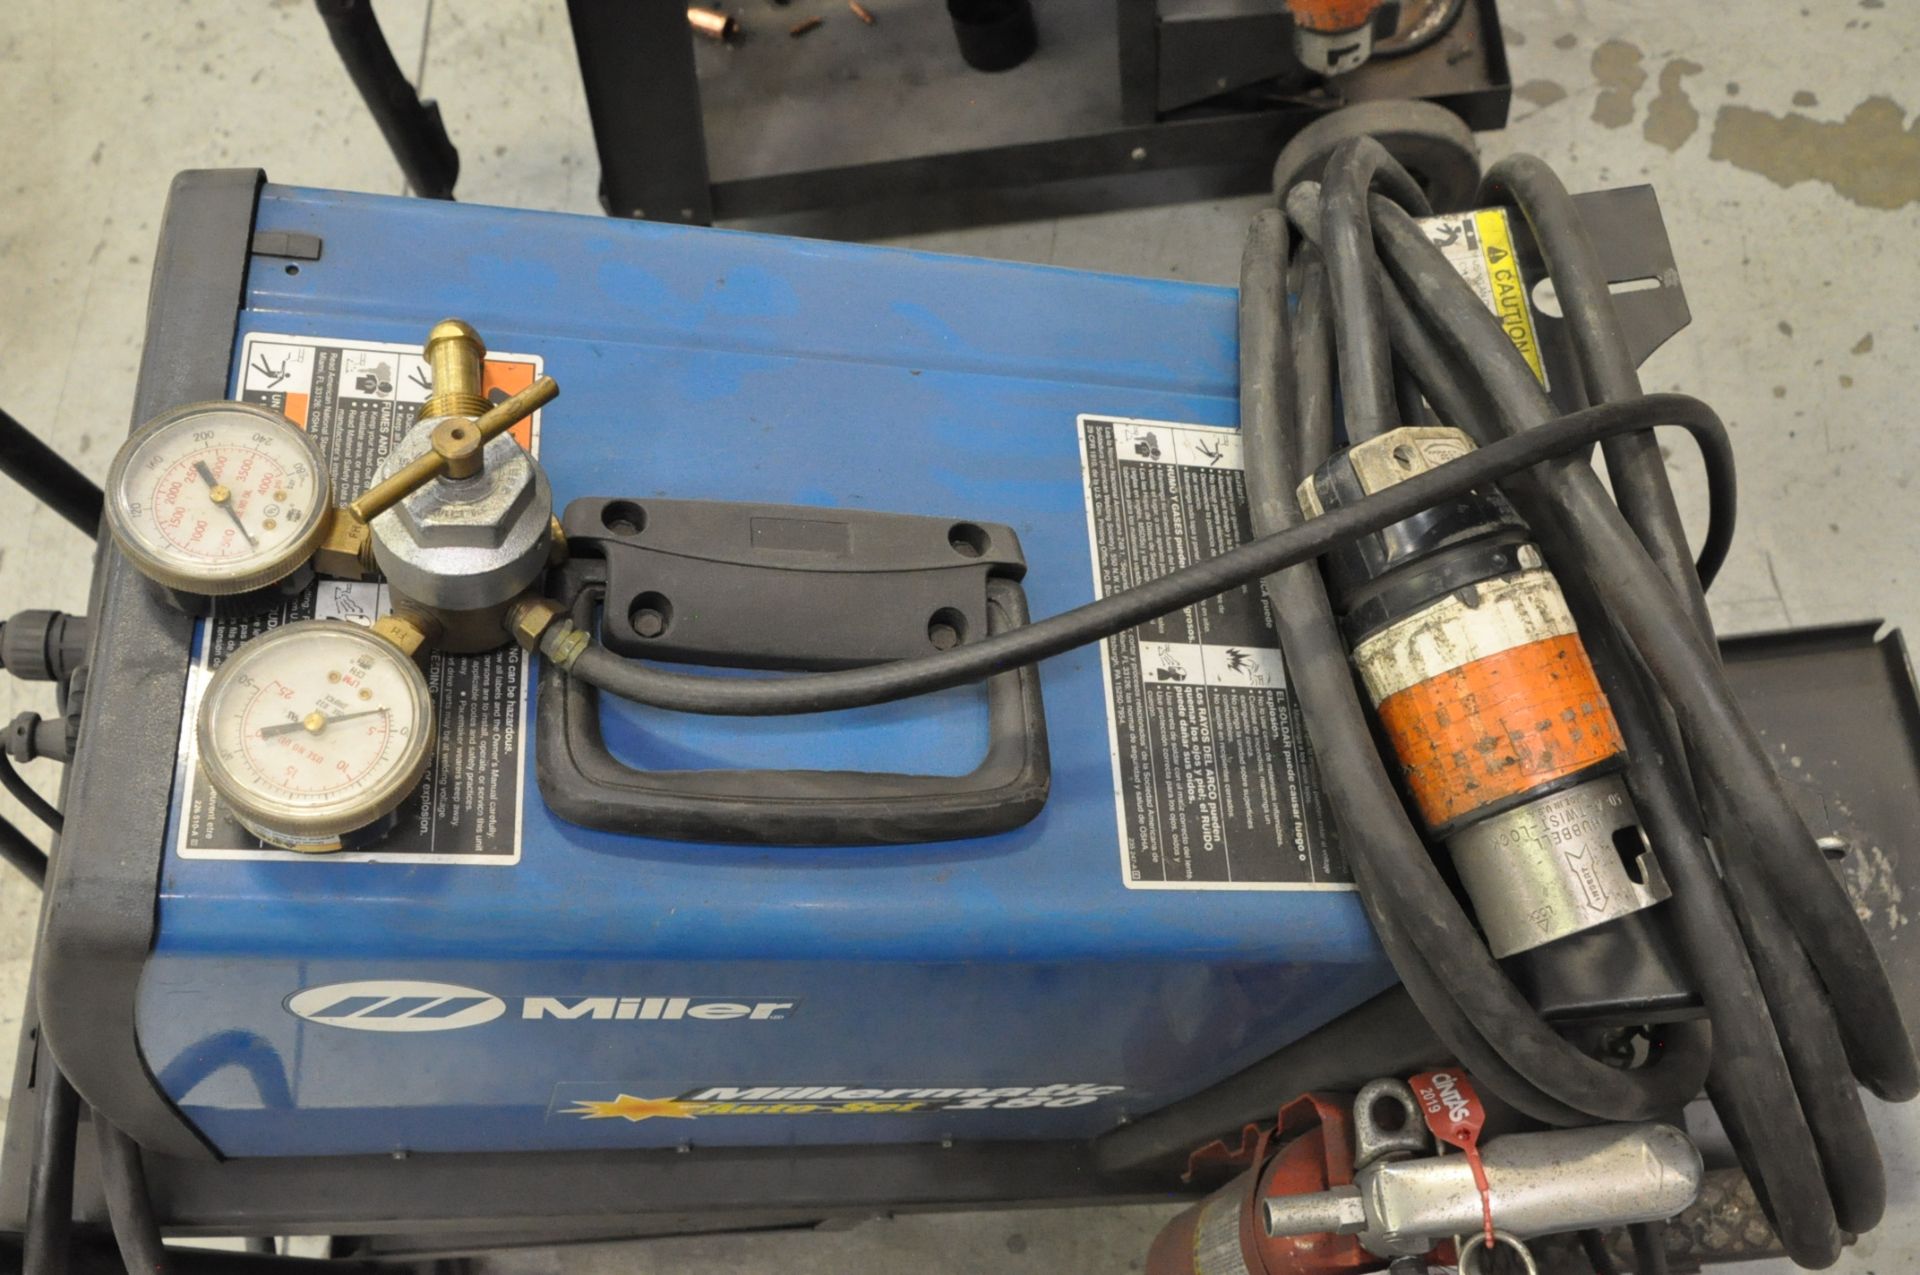 Miller Millermatic 180 Auto-Set, 135-Amps Mig Welding Power Source, with Leads, Portable (2008) - Image 3 of 6